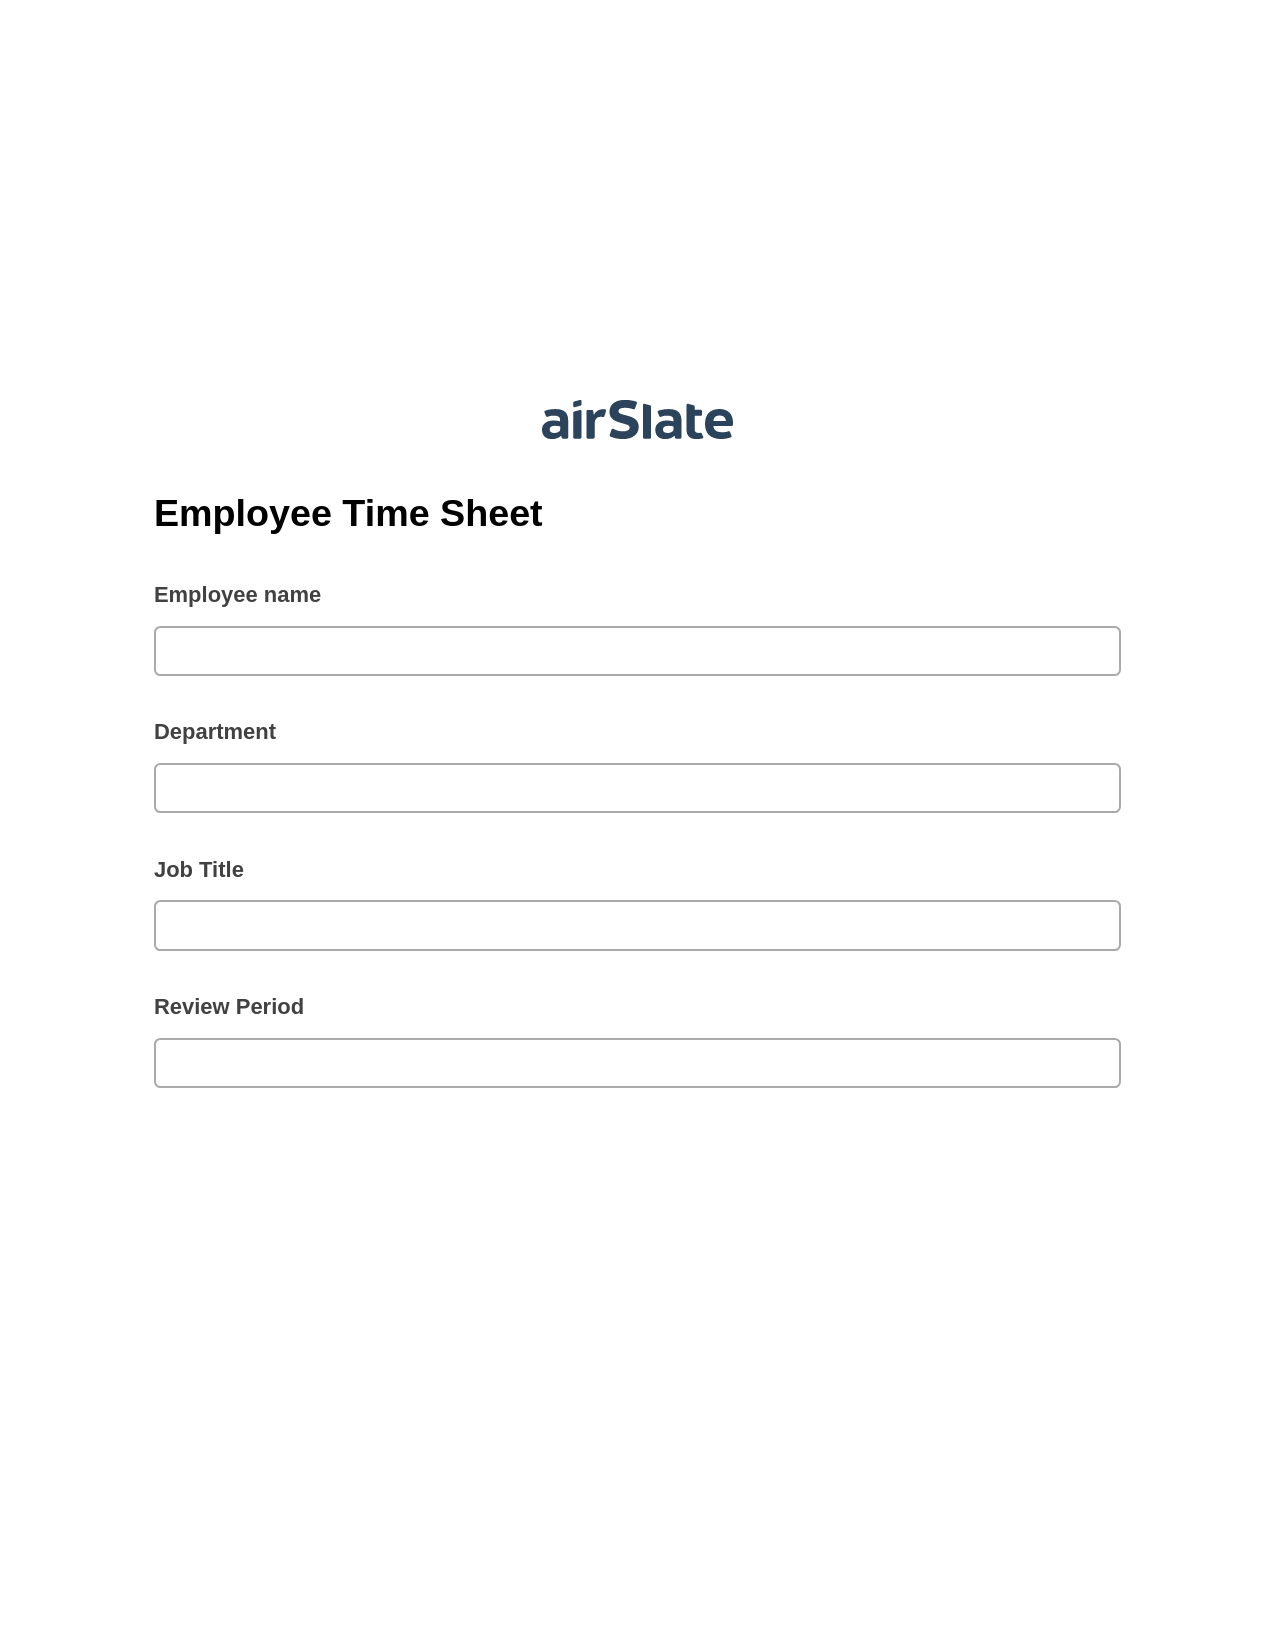 Multirole Employee Time Sheet Pre-fill from Salesforce Records Bot, Create slate from another Flow Bot, Archive to SharePoint Folder Bot